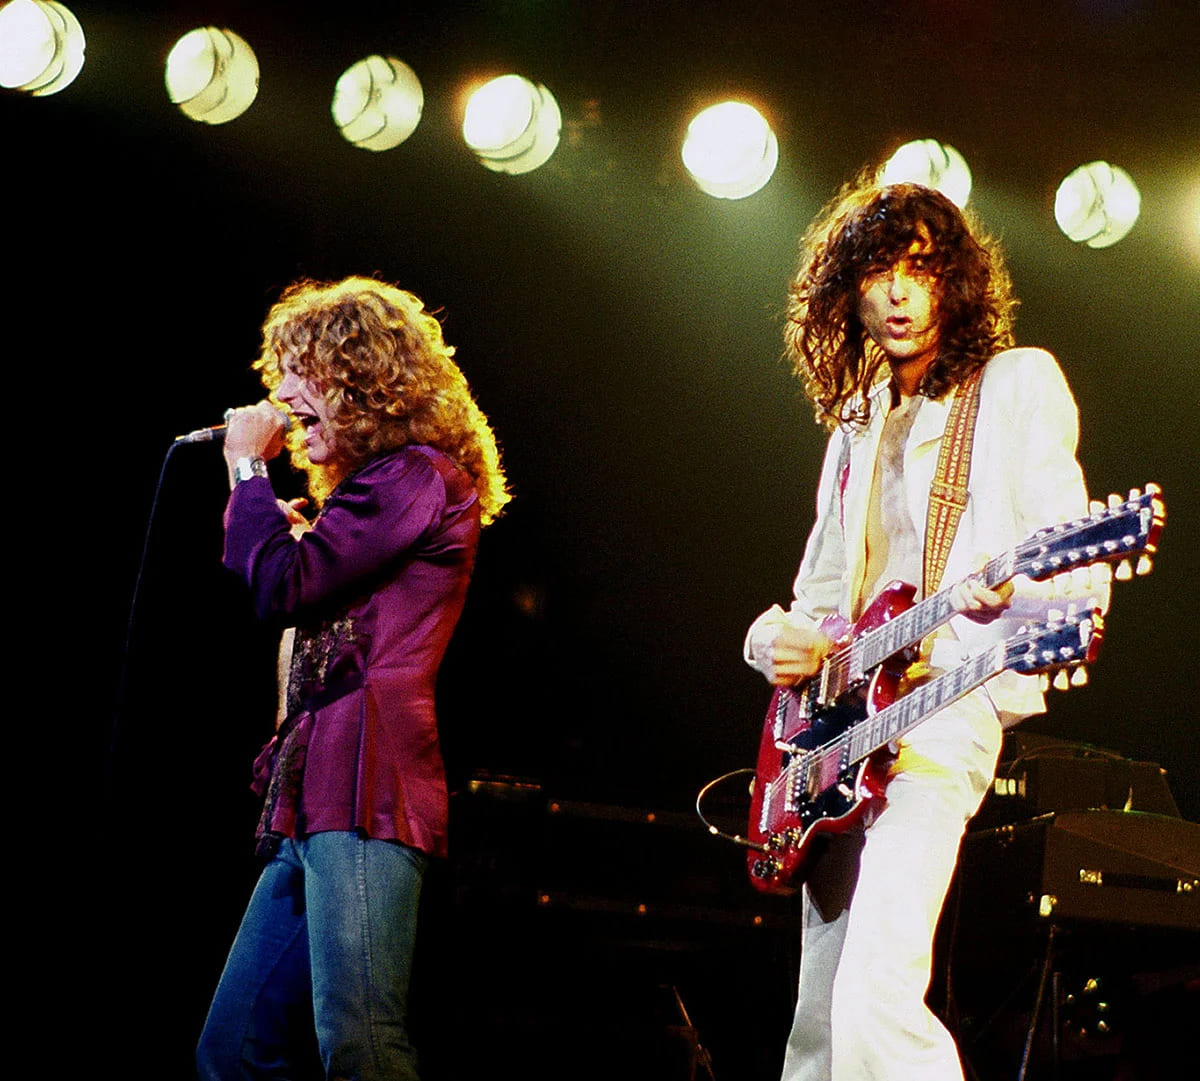 Robert Plant (left) and Jimmy Page (right) of Led Zeppelin at a concert in Chicago, Illinois. Photo: Jim Sammaria